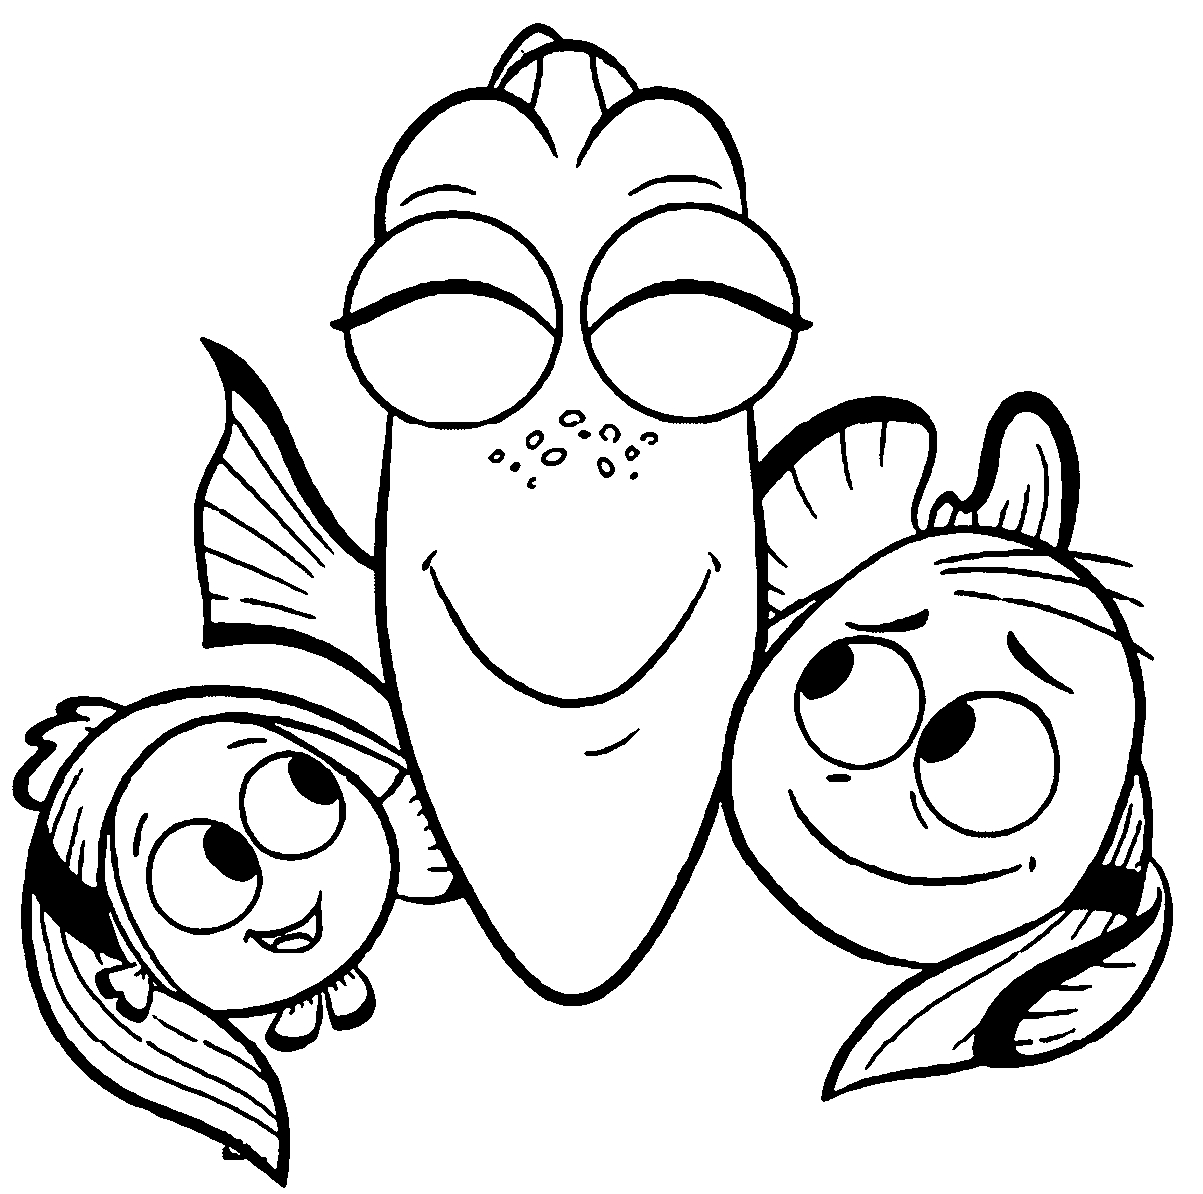 Dory Coloring Pages Best Coloring Pages For Kids Coloring Wallpapers Download Free Images Wallpaper [coloring365.blogspot.com]